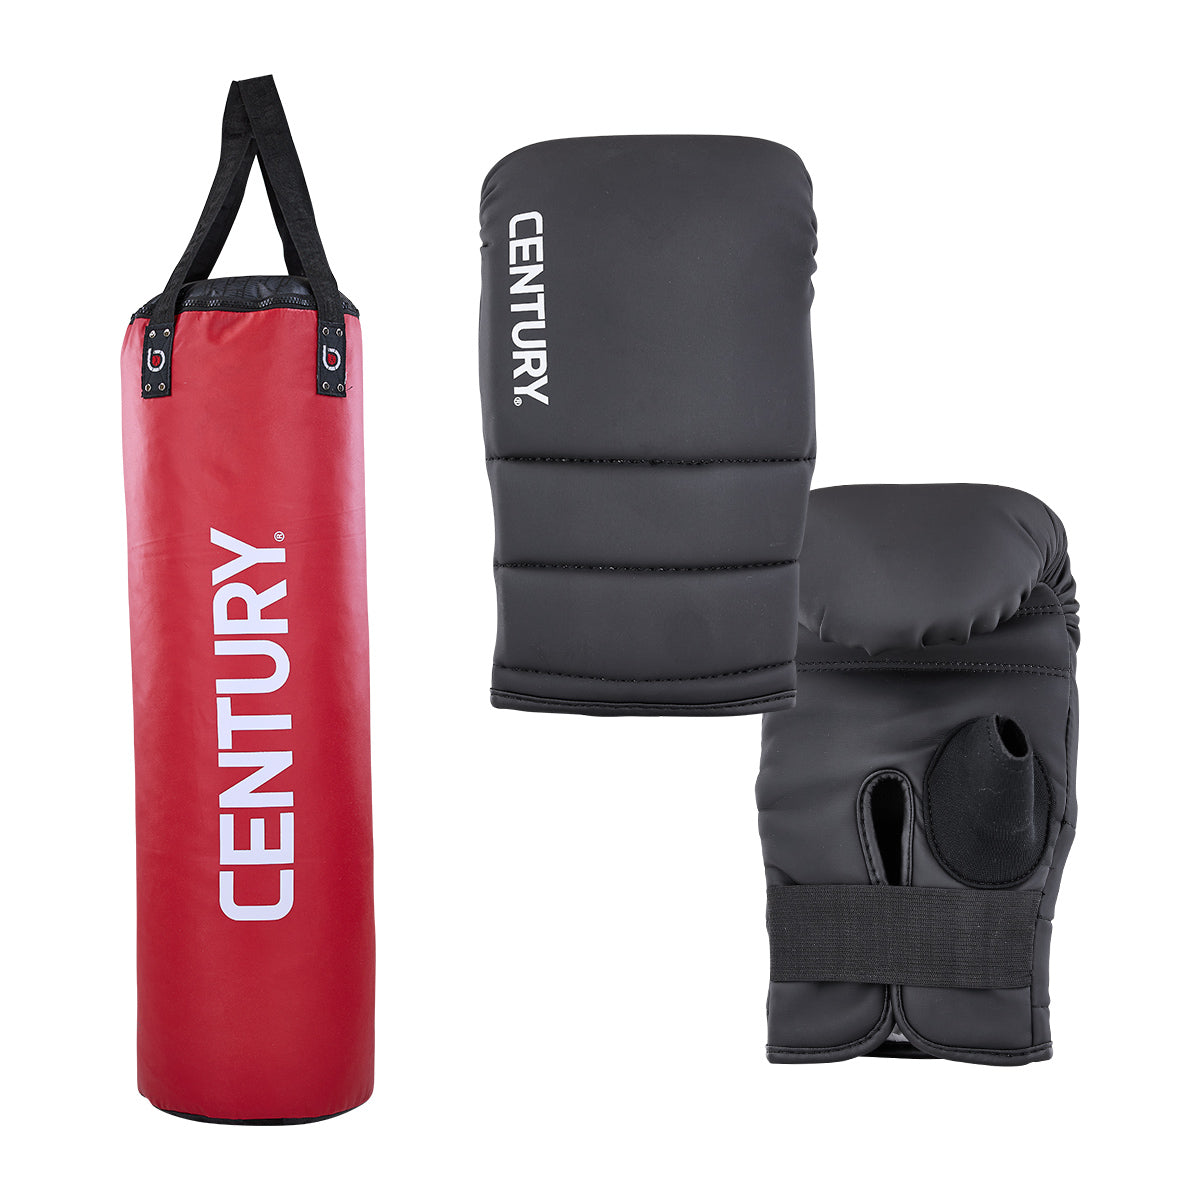 Brave Heavy Bag Combo 70 lbs. Red Black